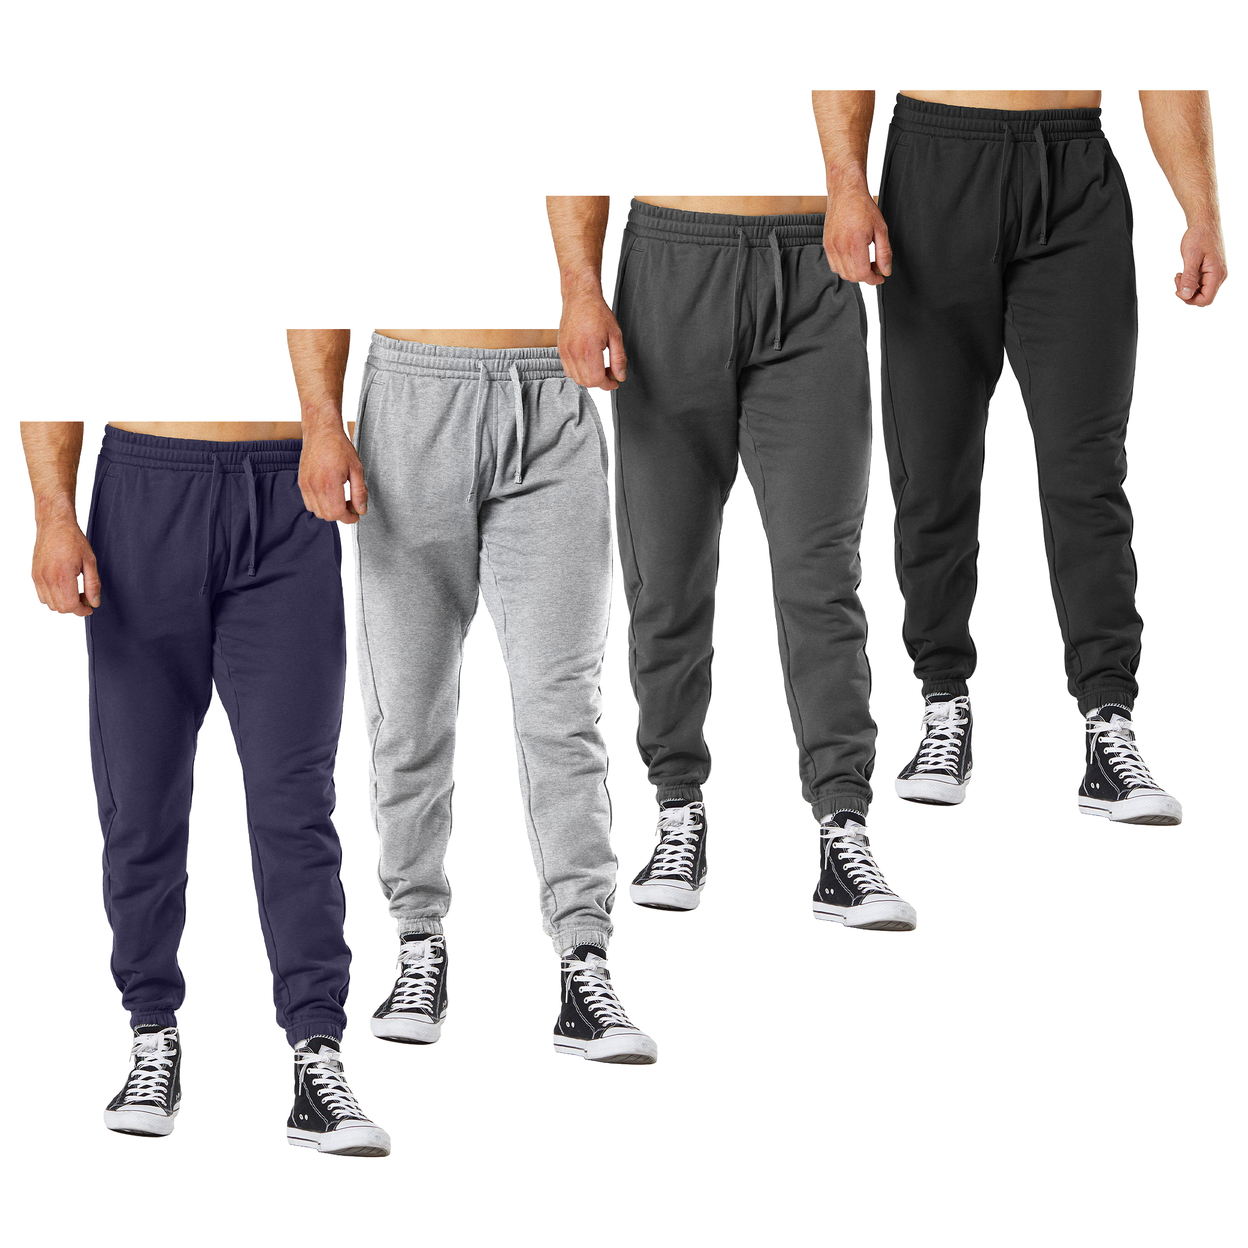 Multi-Pack: Men's Ultra-Soft Cozy Winter Warm Casual Fleece-Lined Sweatpants Jogger - 1-pack, Xx-large